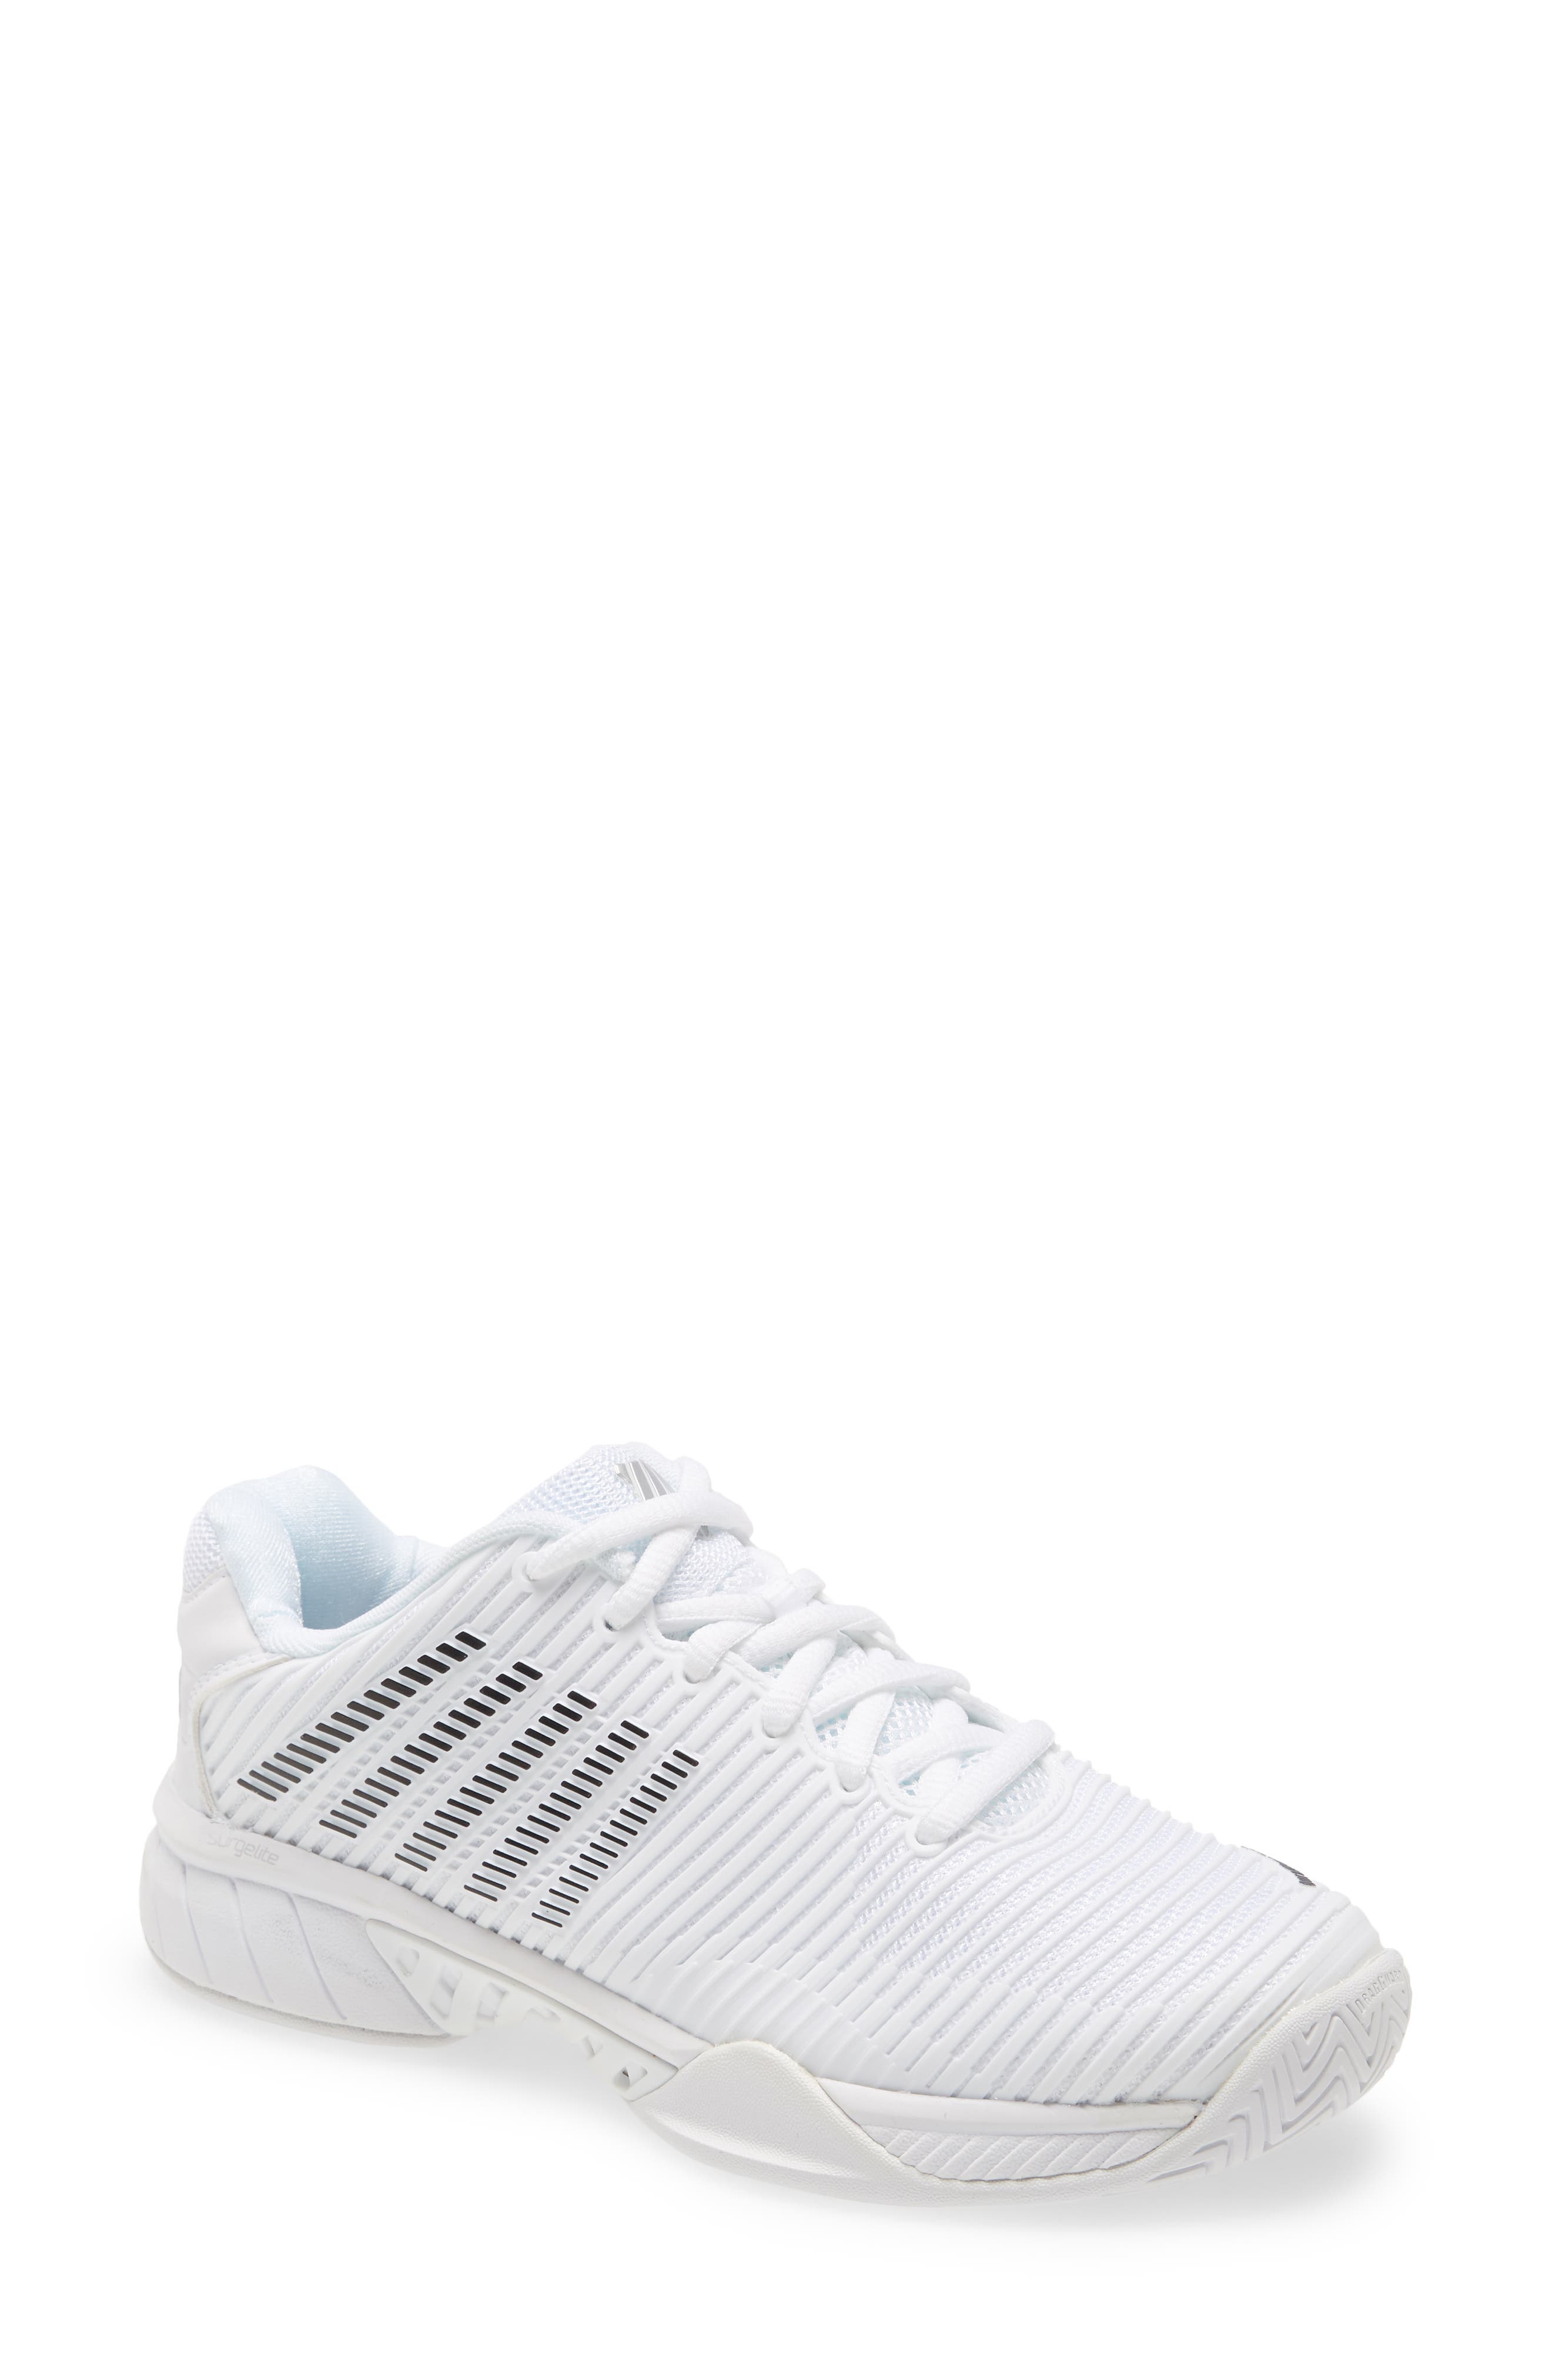 nordstrom white sneakers womens